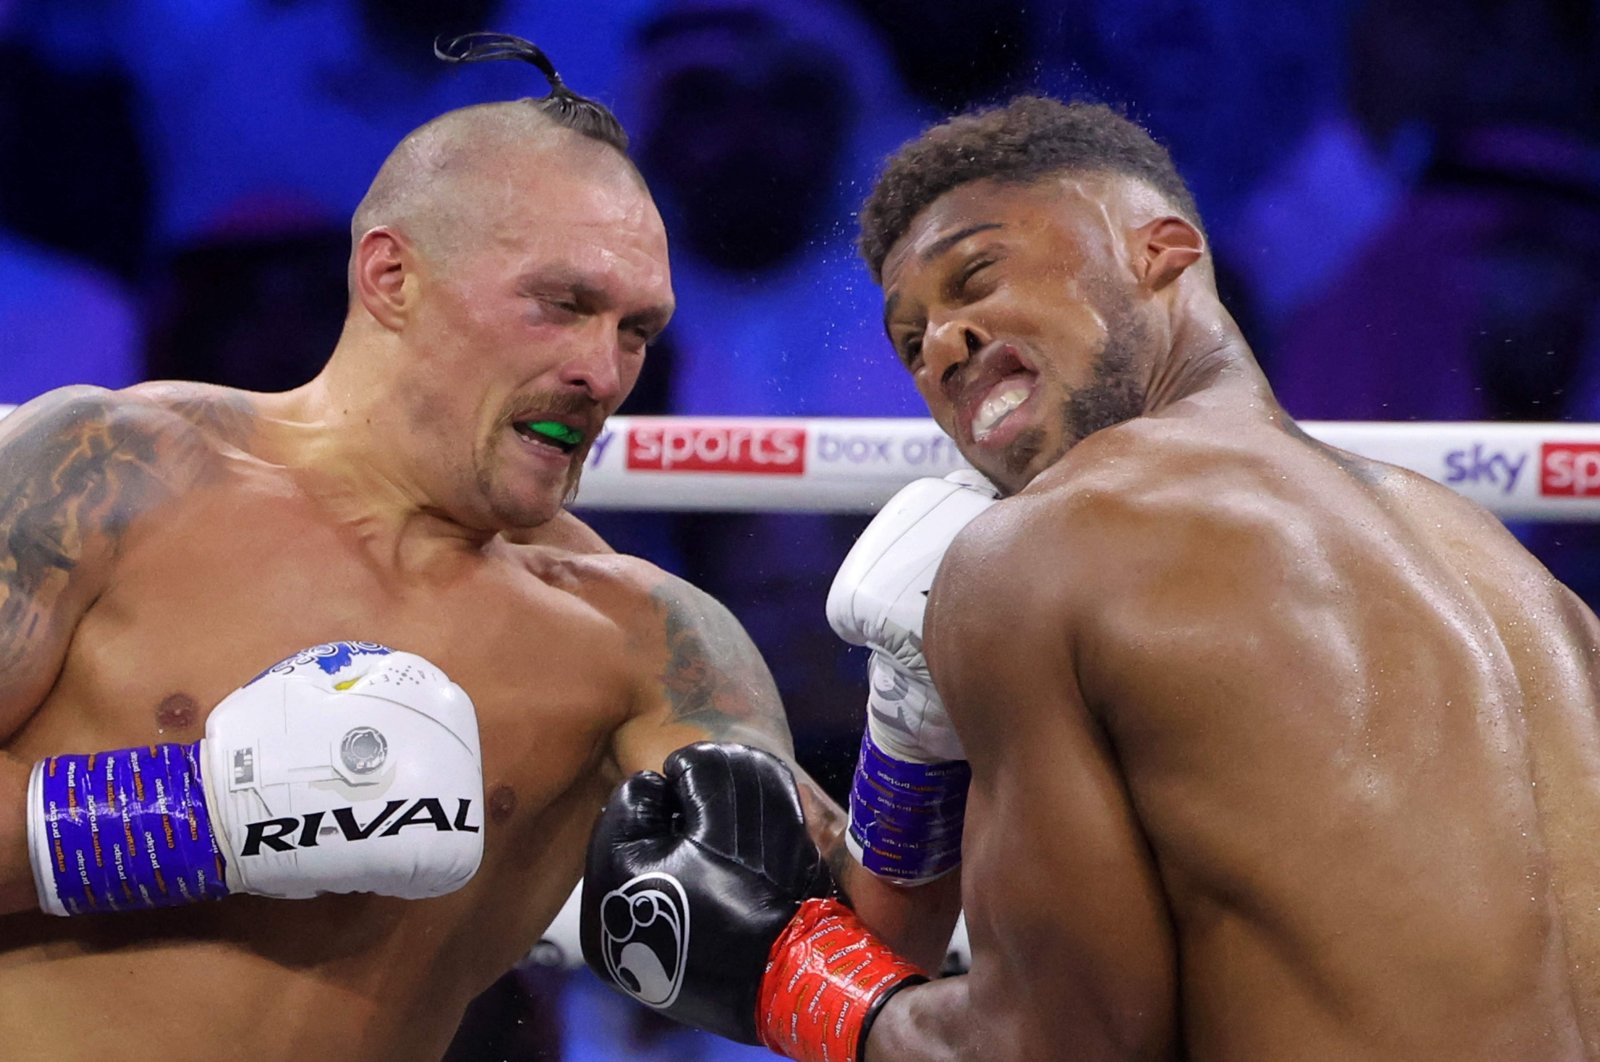 Ukraine&#039;s Oleksandr Usyk (L) and Britain&#039;s Anthony Joshua (R) compete during the heavyweight boxing rematch, Jeddah, Saudi Arabia, Aug. 20, 2022. (AFP Photo)